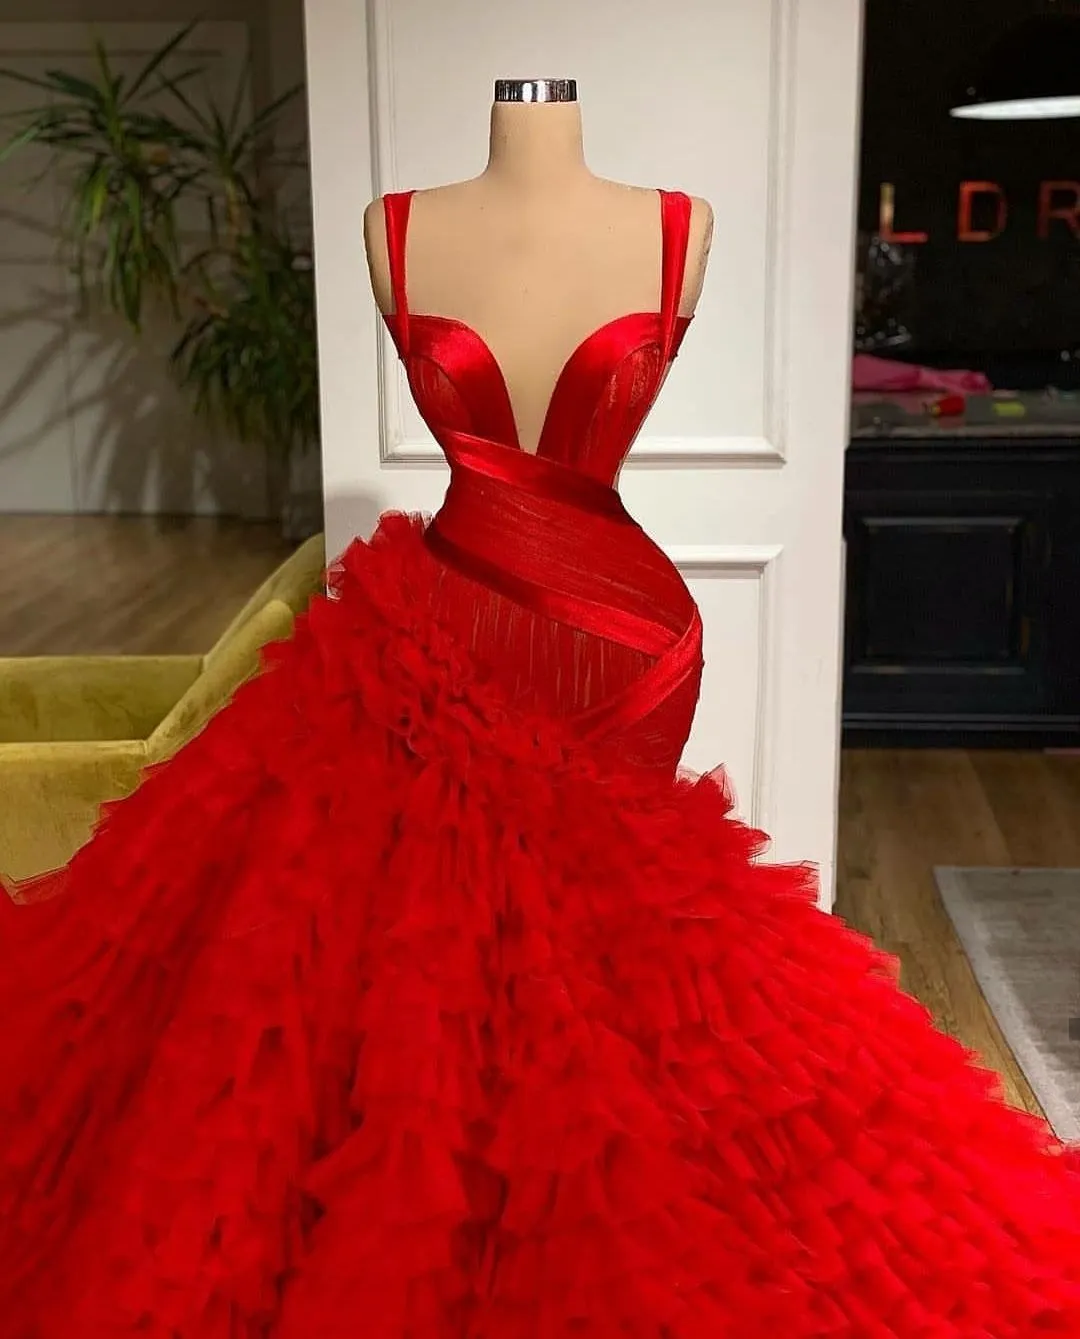 Luxury Red Mermaid Evening Dresses Tiered Ruffles Spaghetti Straps Prom Gowns Women Red Carpet Celebrity Dress